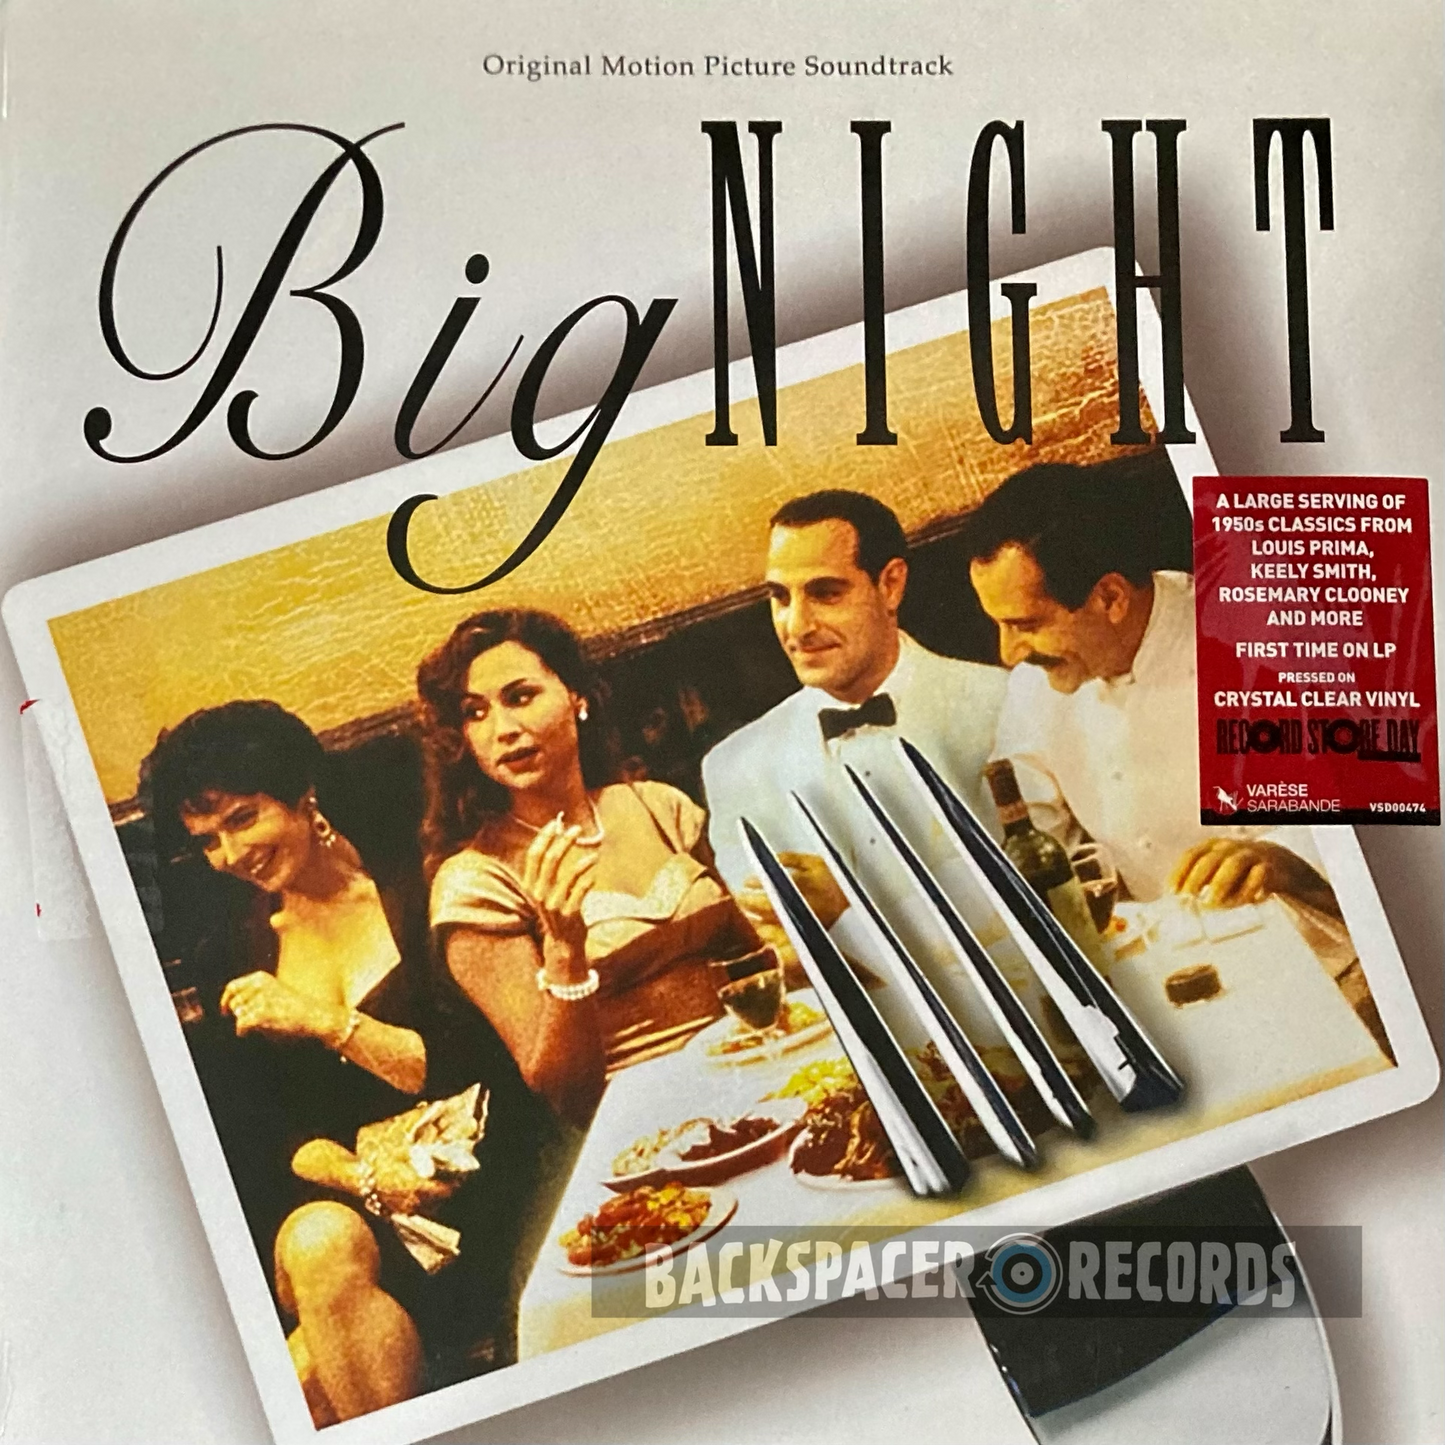 Big Night: Original Motion Picture Soundtrack - Various Artists (Limited Edition) LP (Sealed)